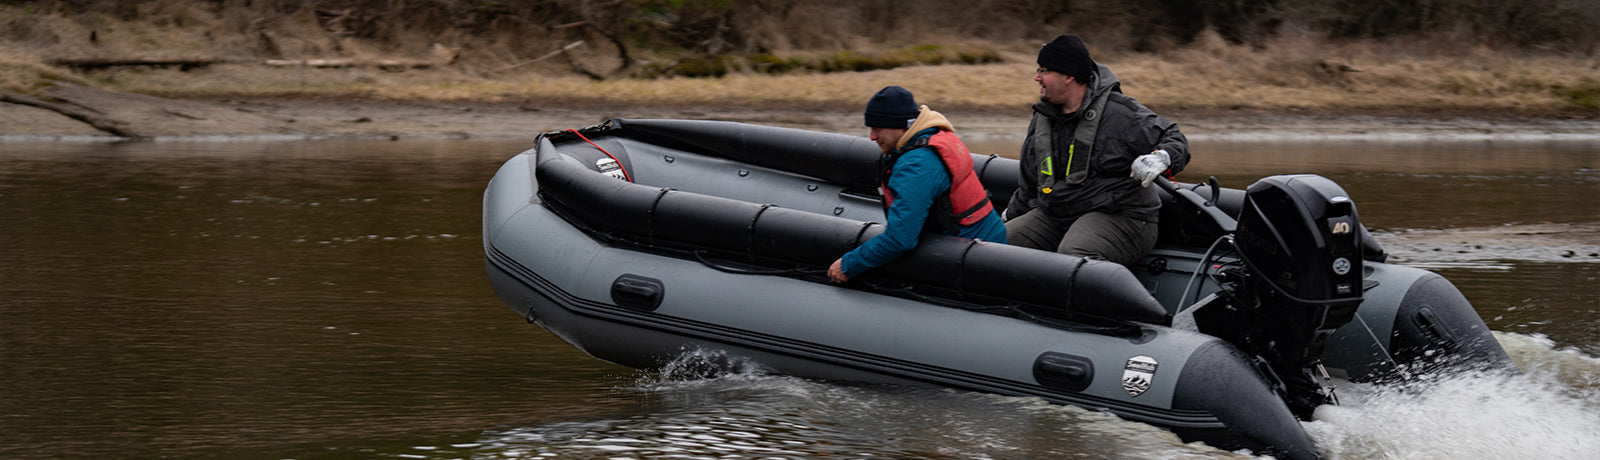 A jet tunnel inflatable boat in a shallow river with two people